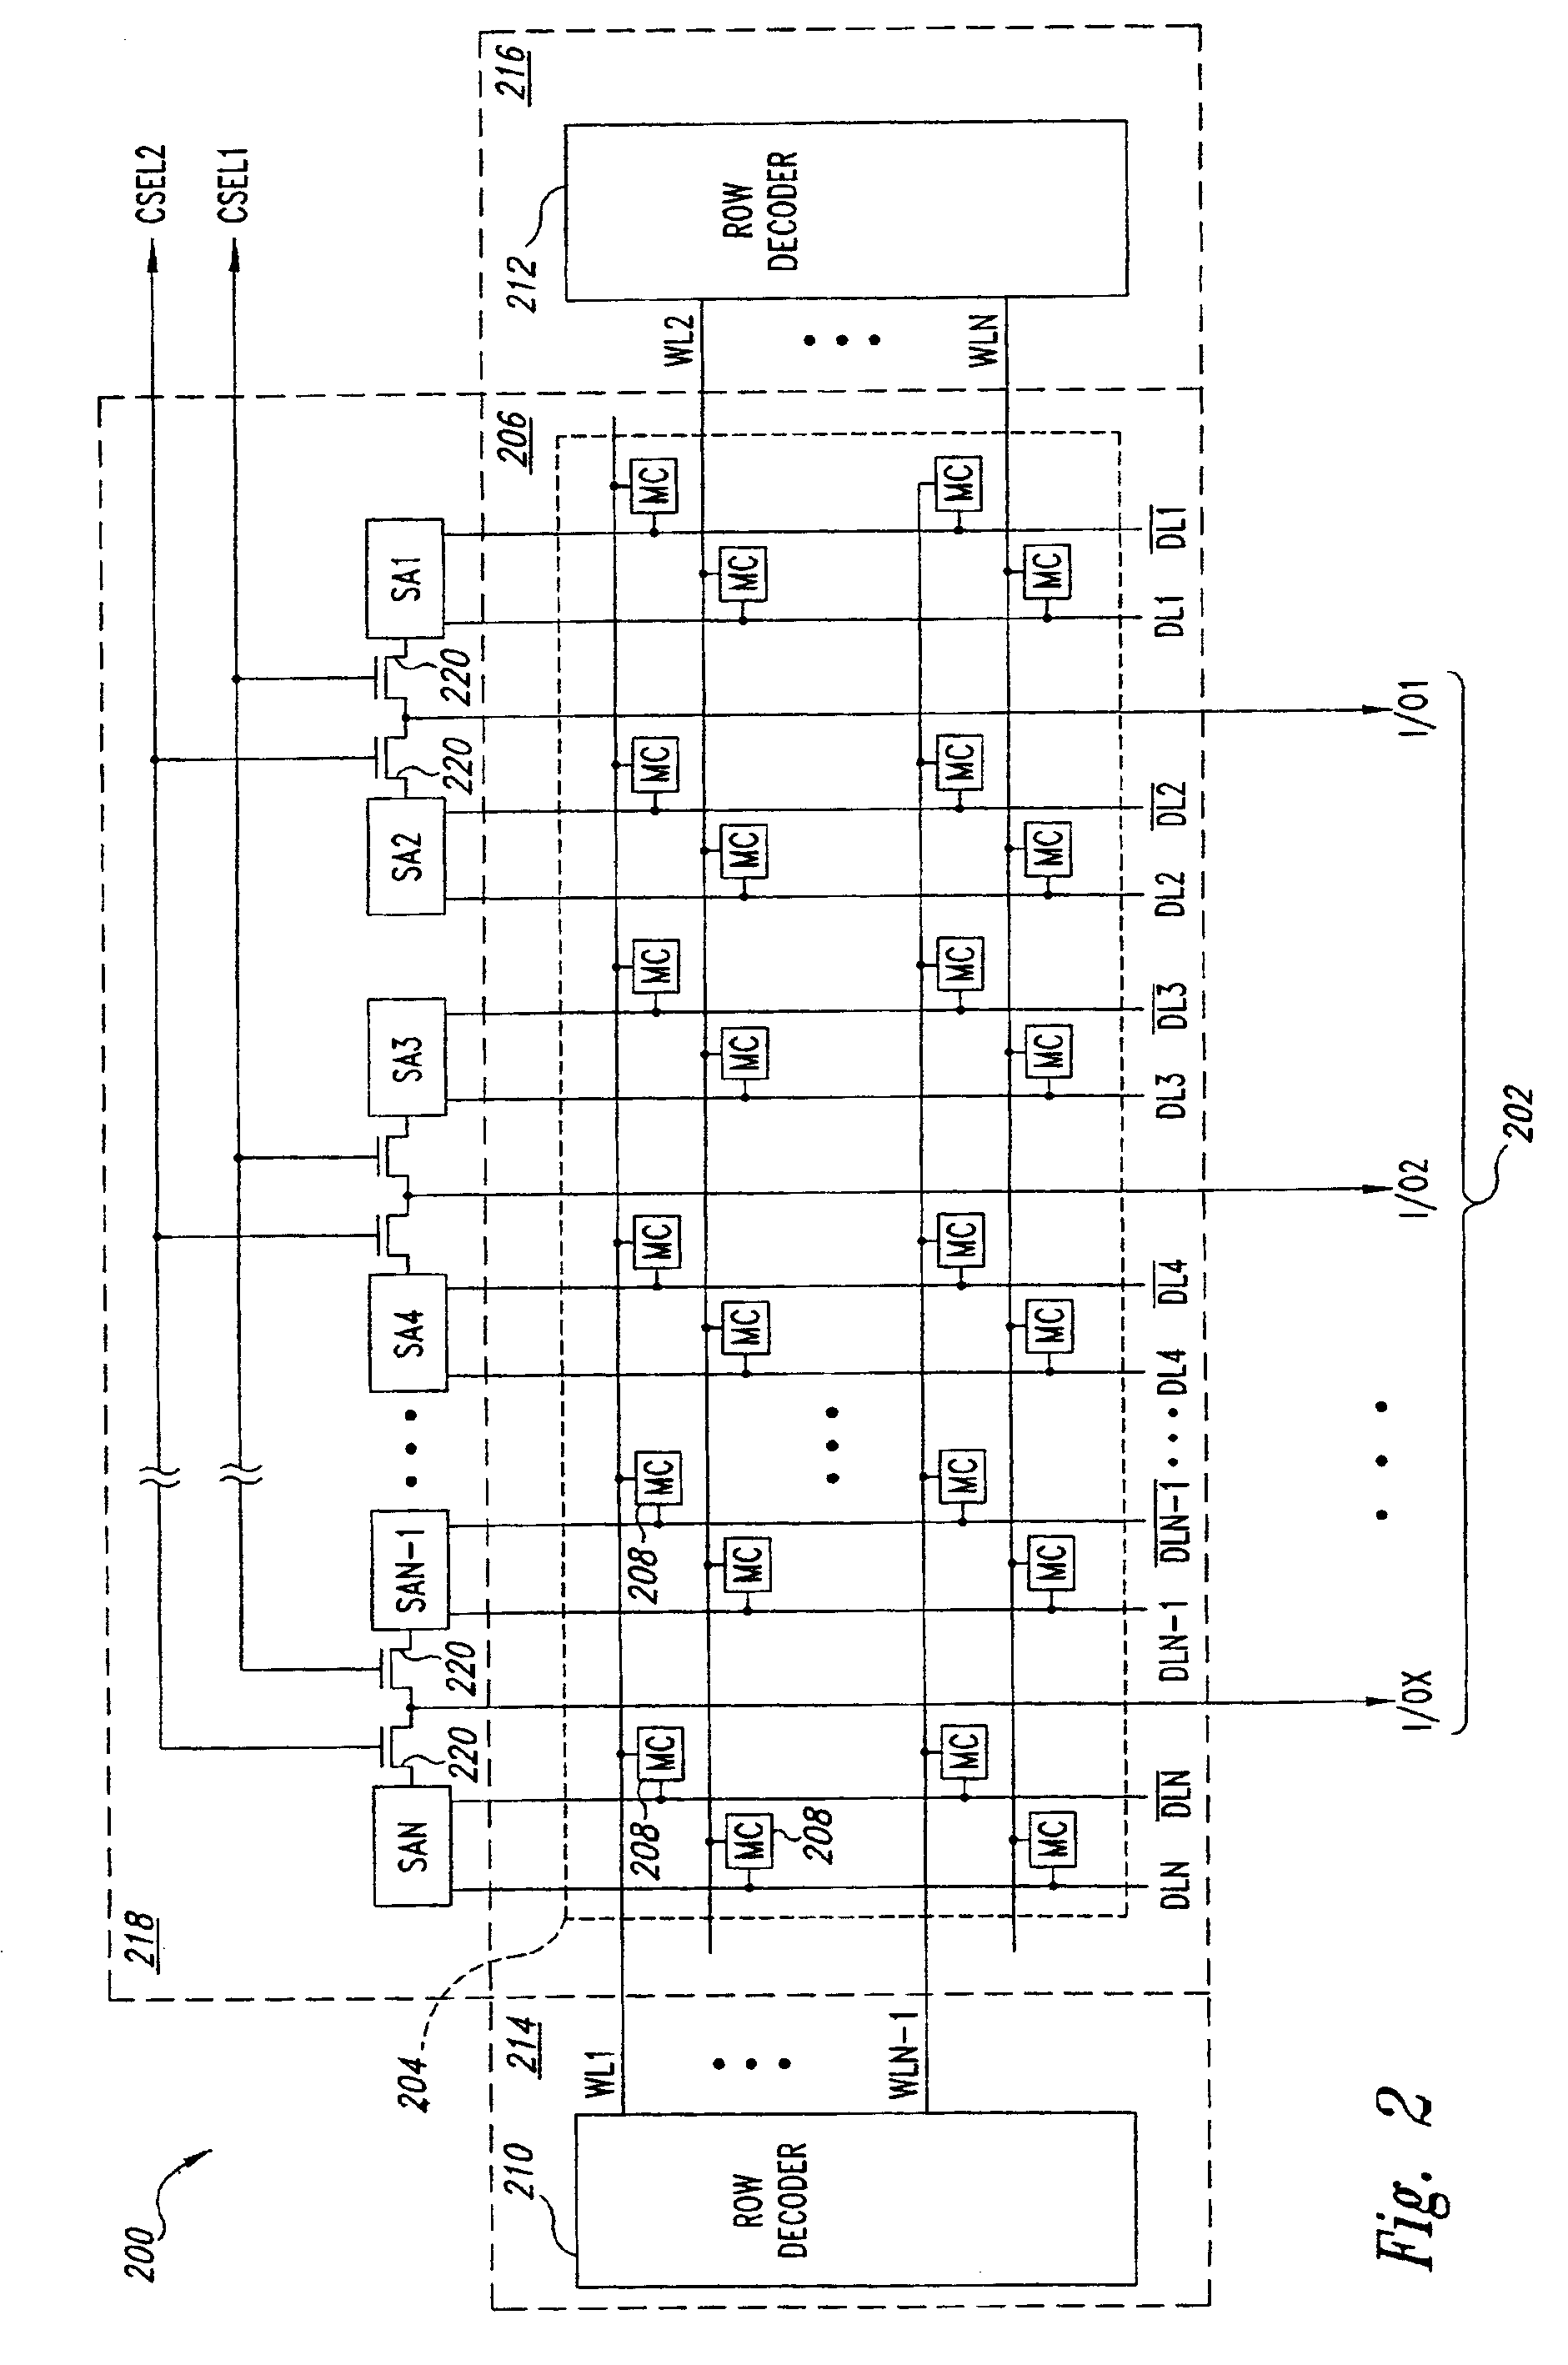 Memory device having a relatively wide data bus